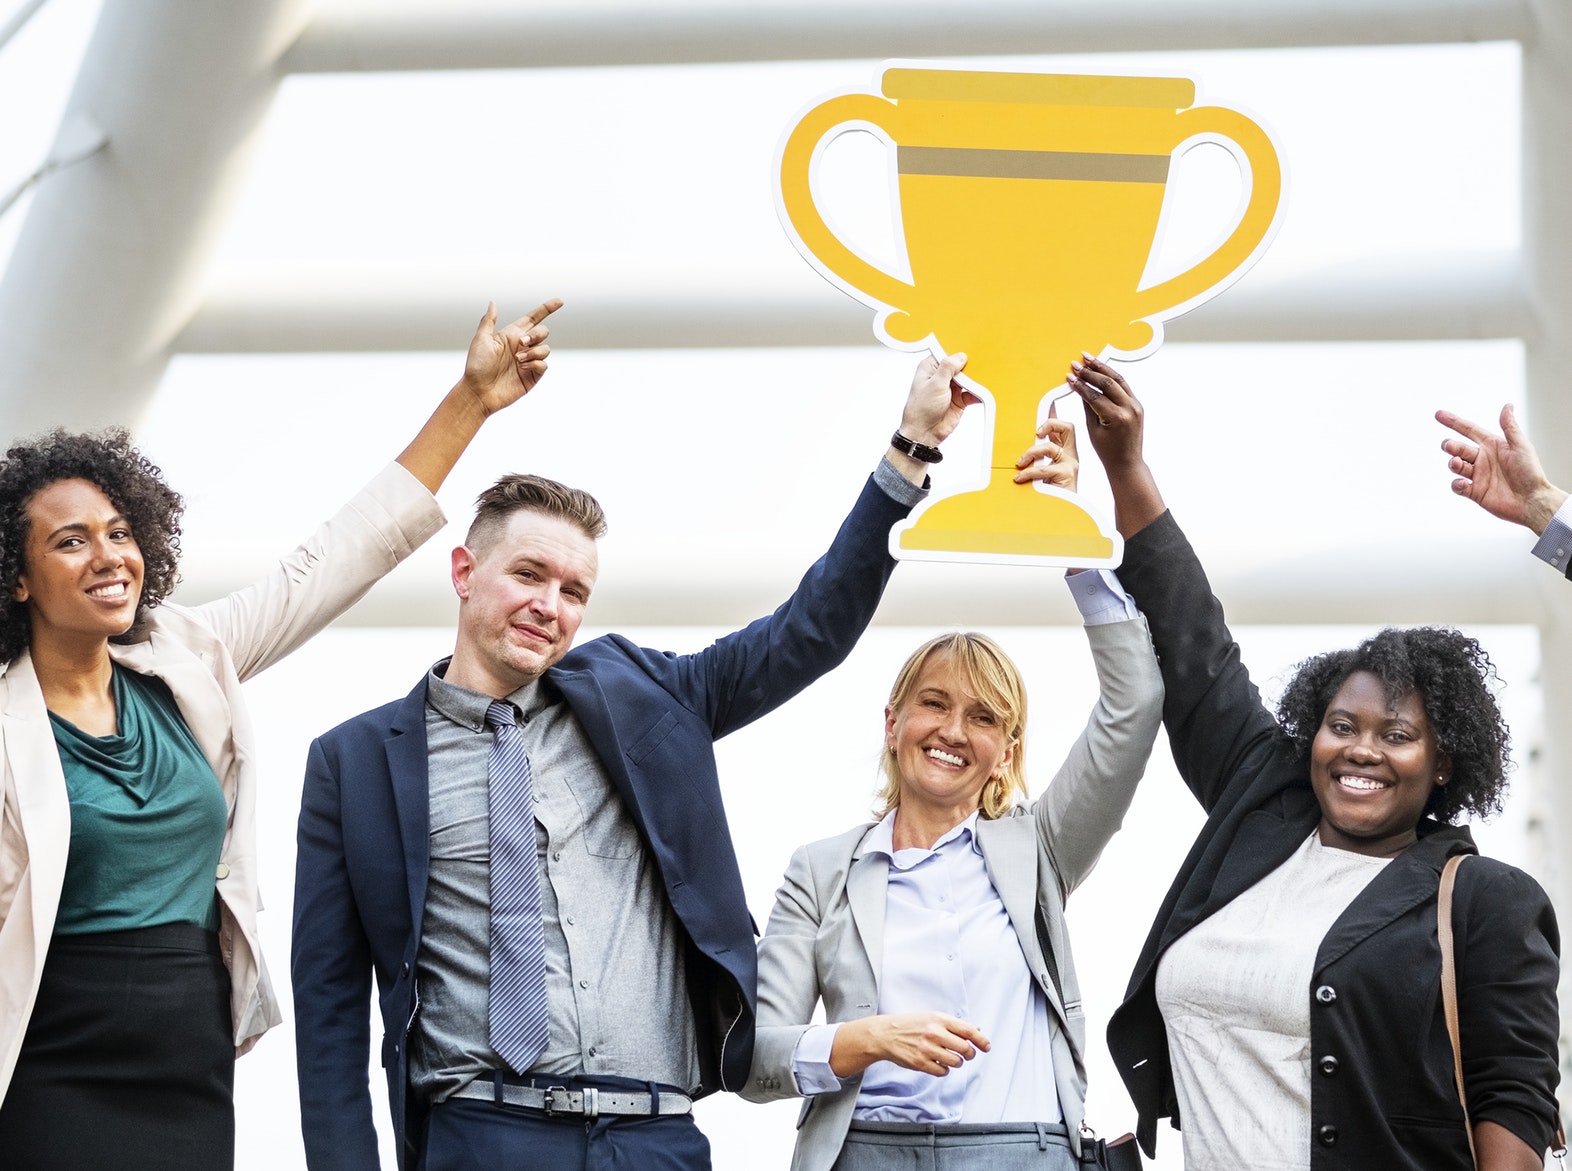 ENTITY shares three job interview mistakes to avoid. Photo of group holding a paper trophy.